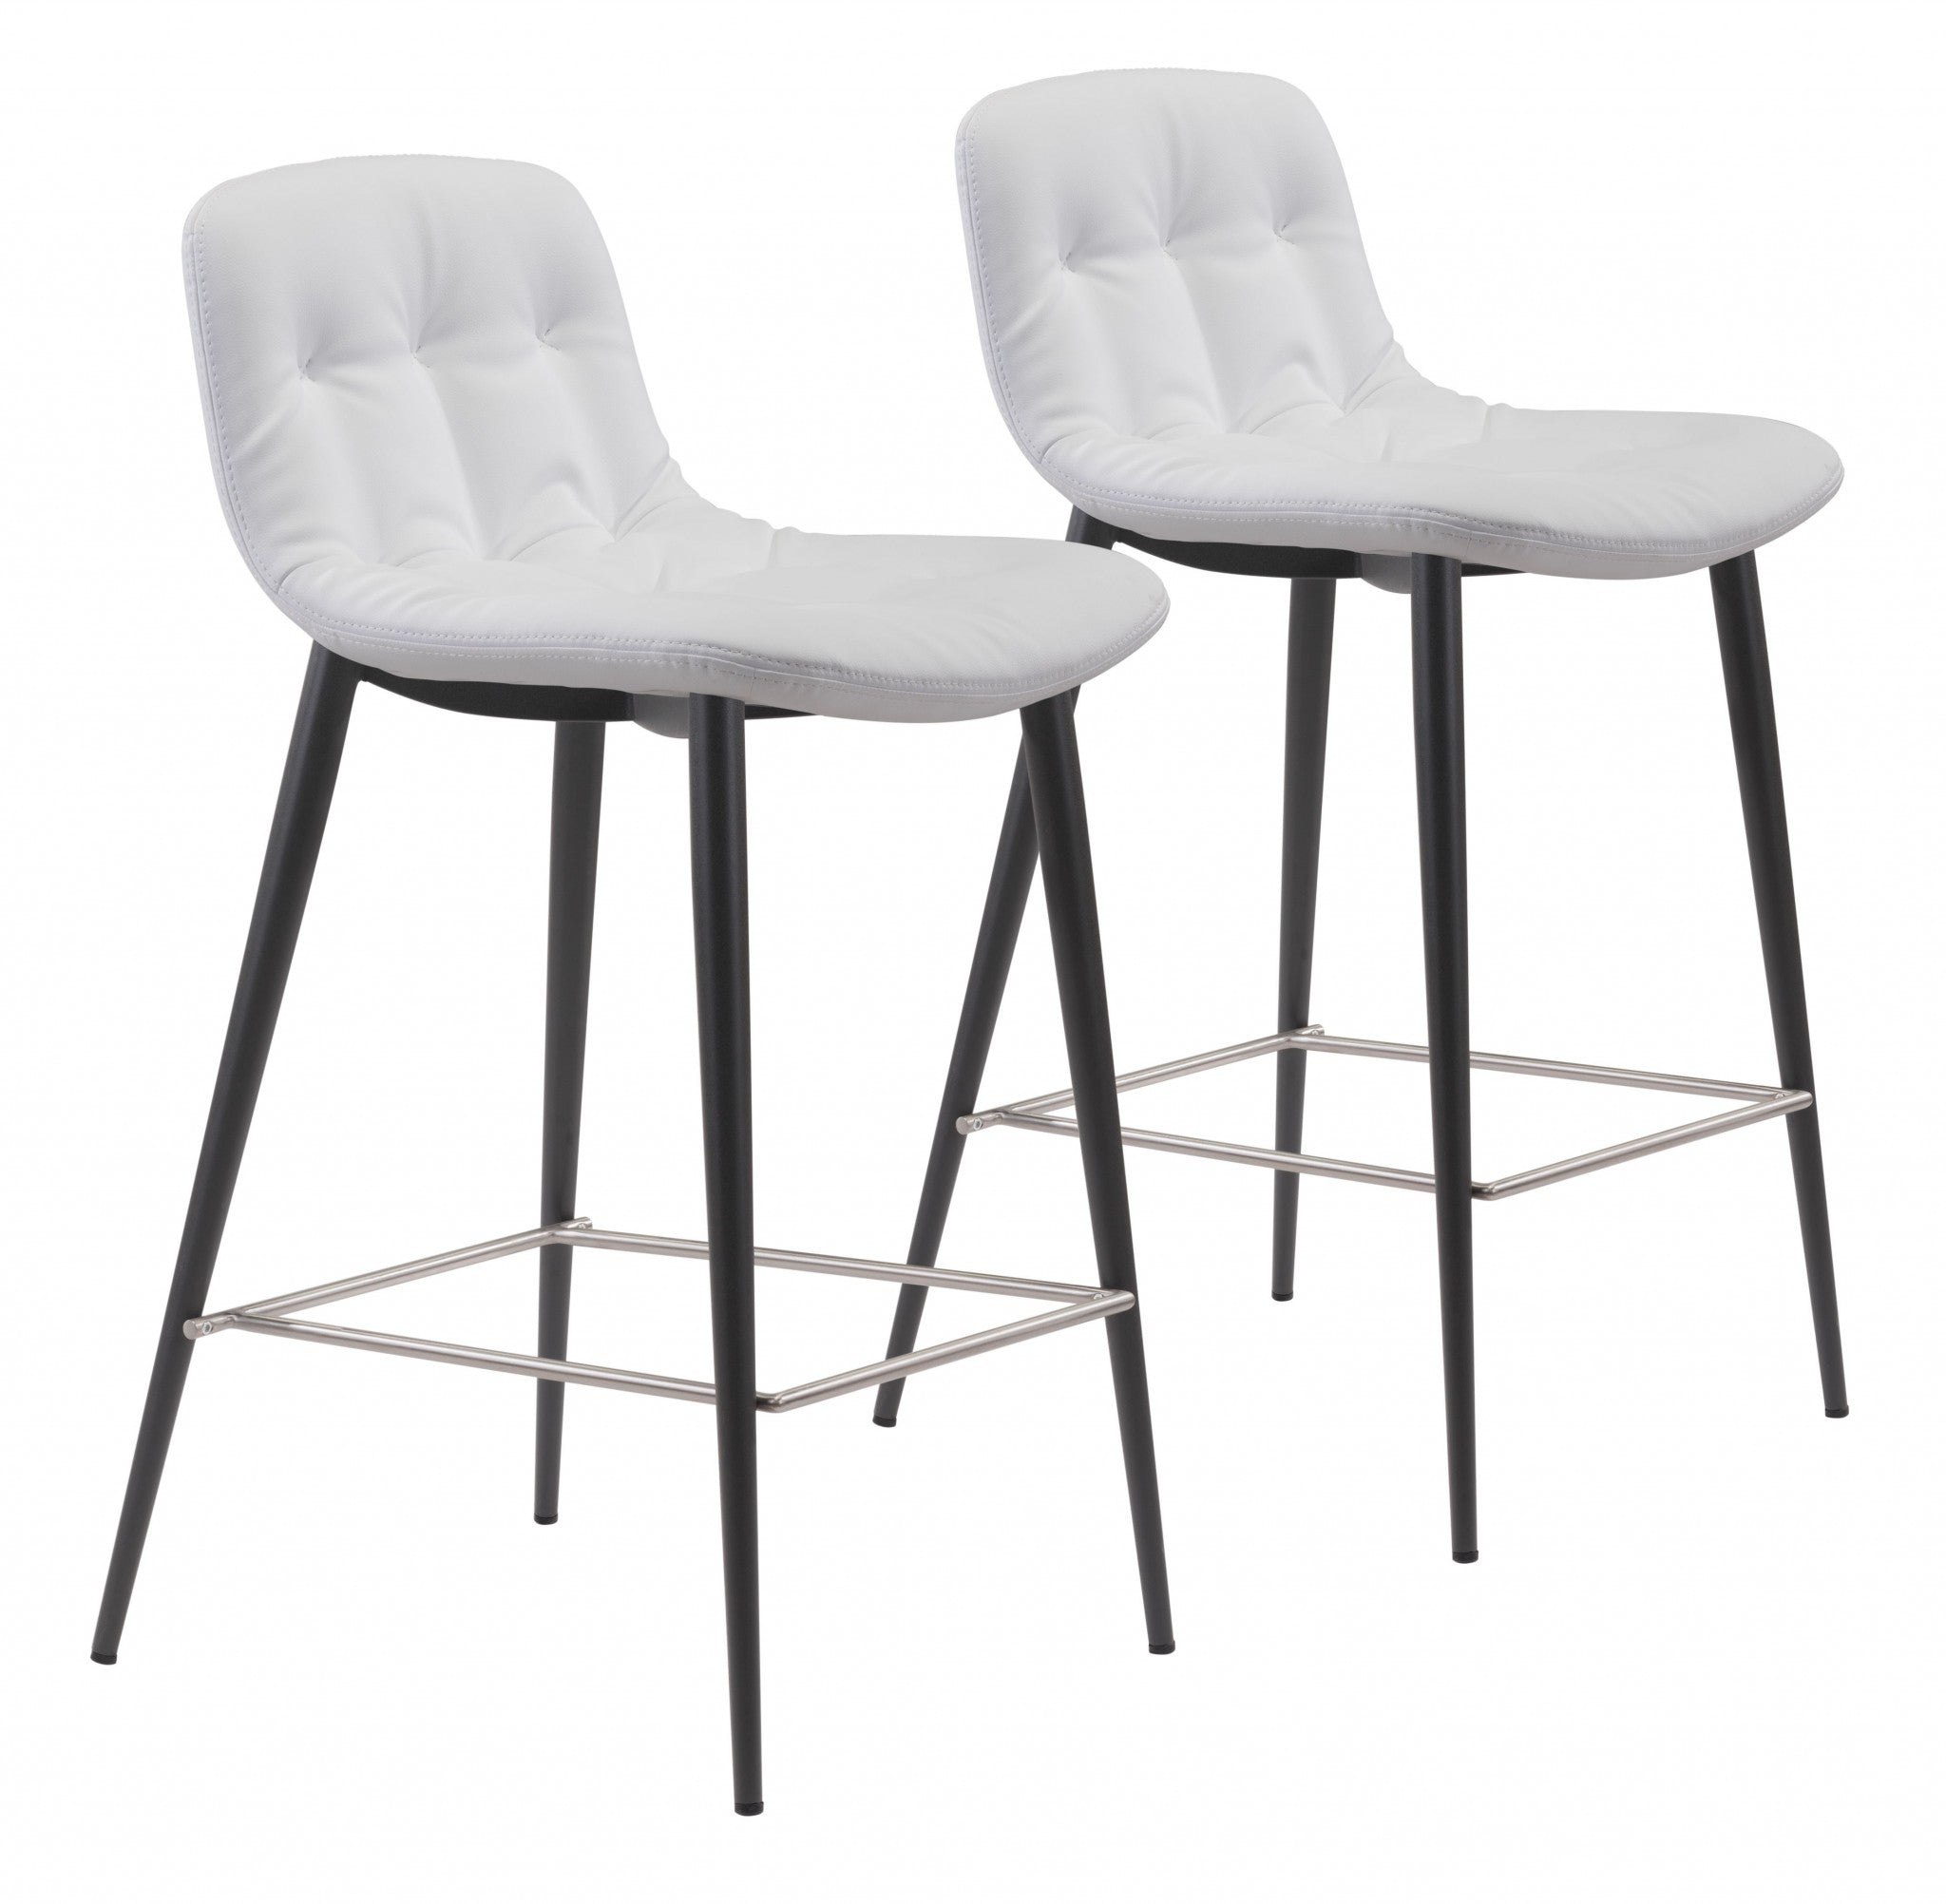 Set Of Two 36" White Steel Low Back Chairs With Footrest